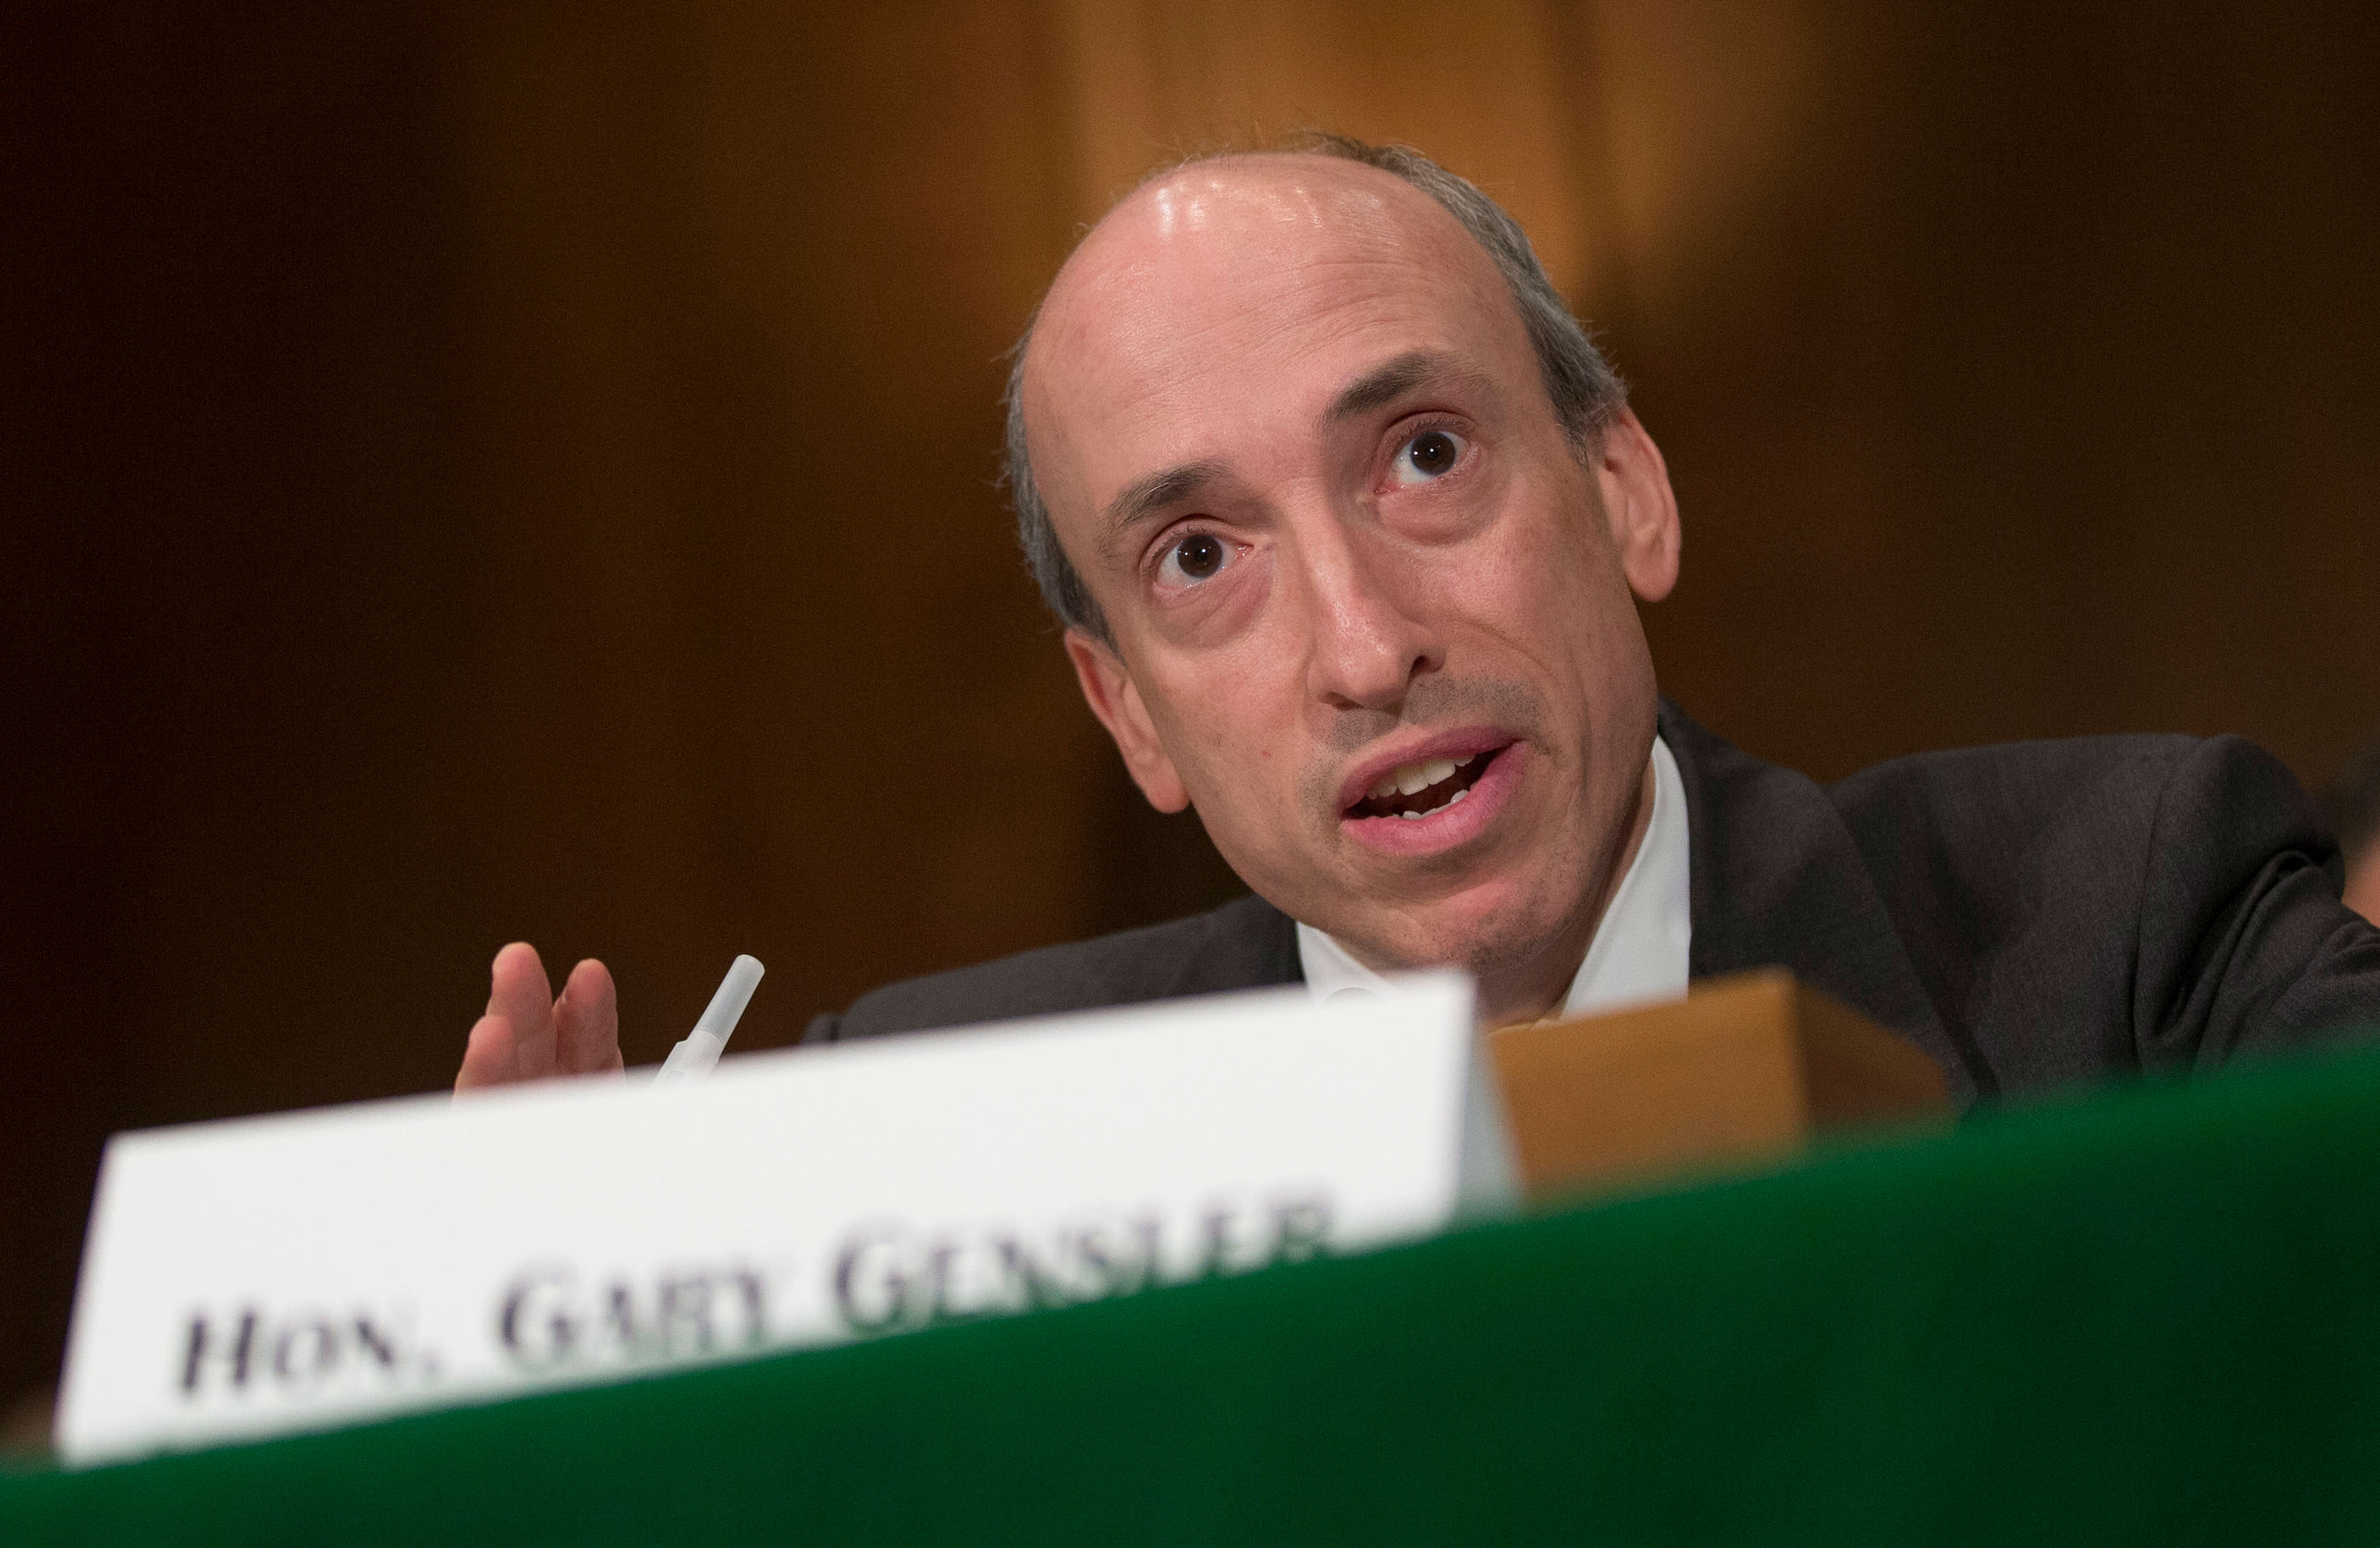 Gary Gensler has been confirmed by the Senate to lead the SEC, Wall Street’s main regulator